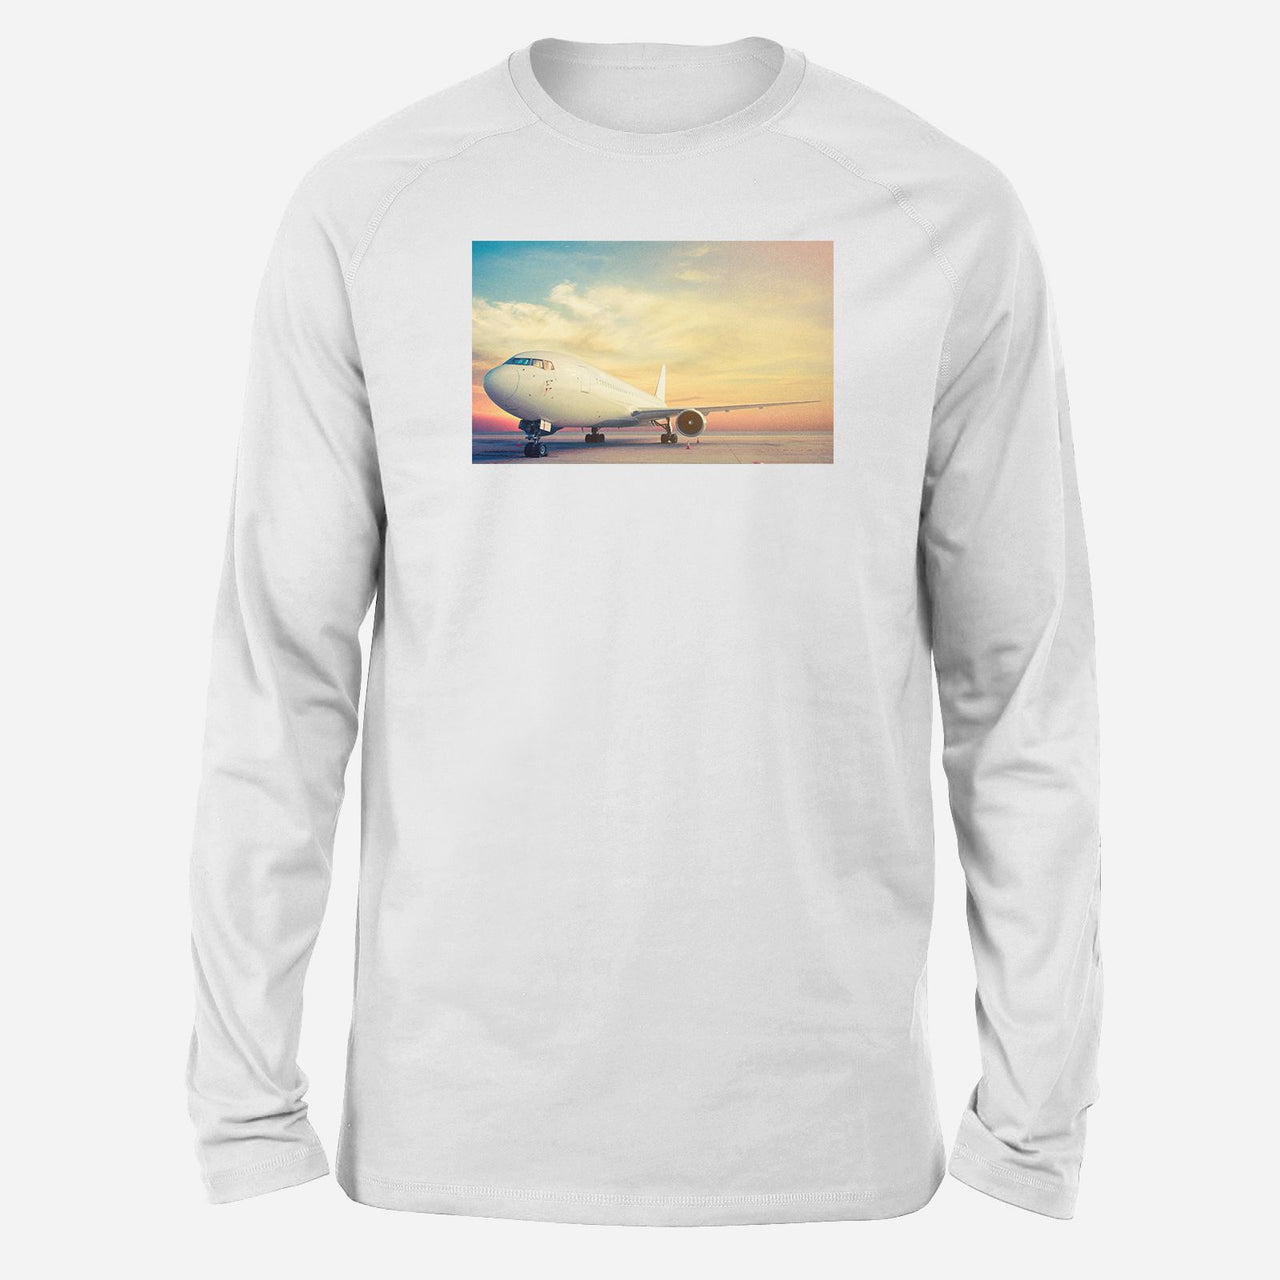 Parked Aircraft During Sunset Designed Long-Sleeve T-Shirts